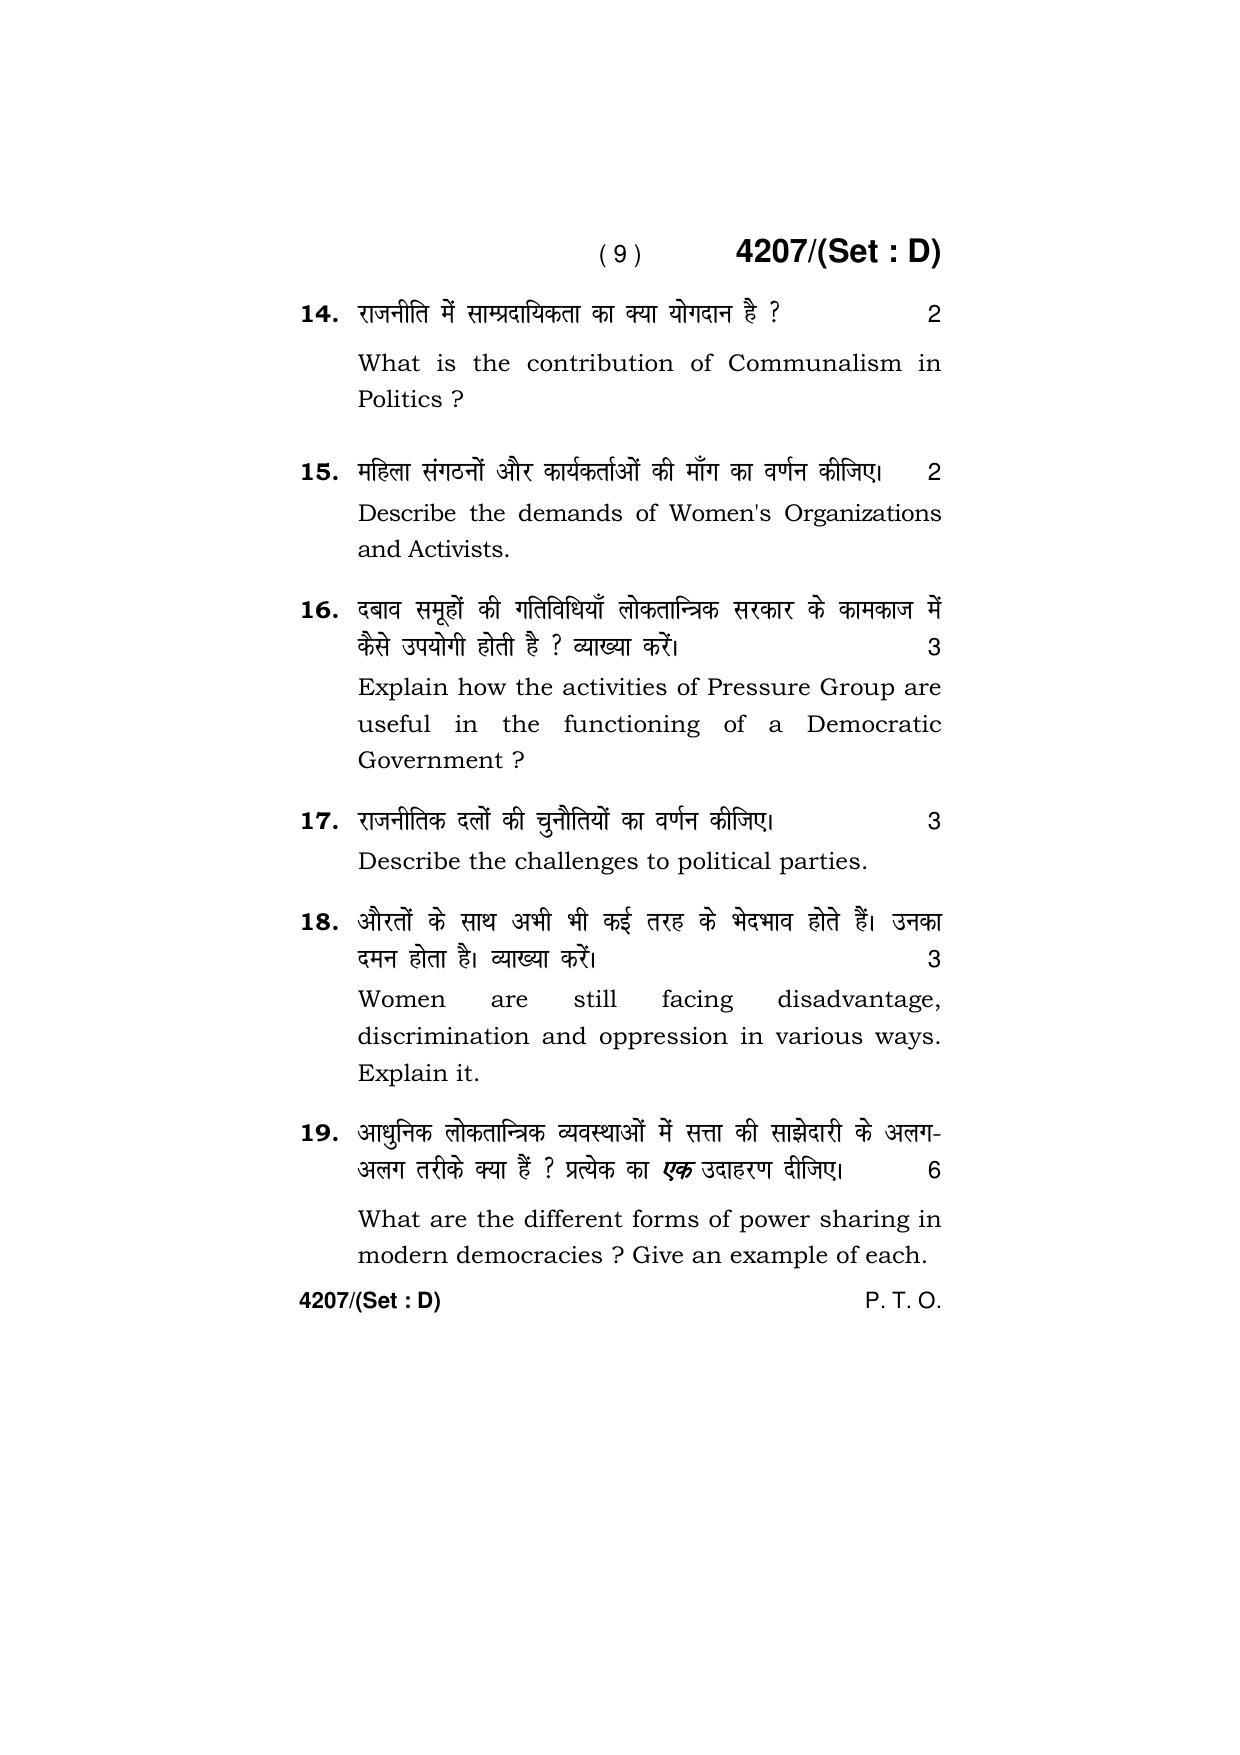 Haryana Board HBSE Class 10 Social Science (All Set) 2019 Question Paper - Page 54